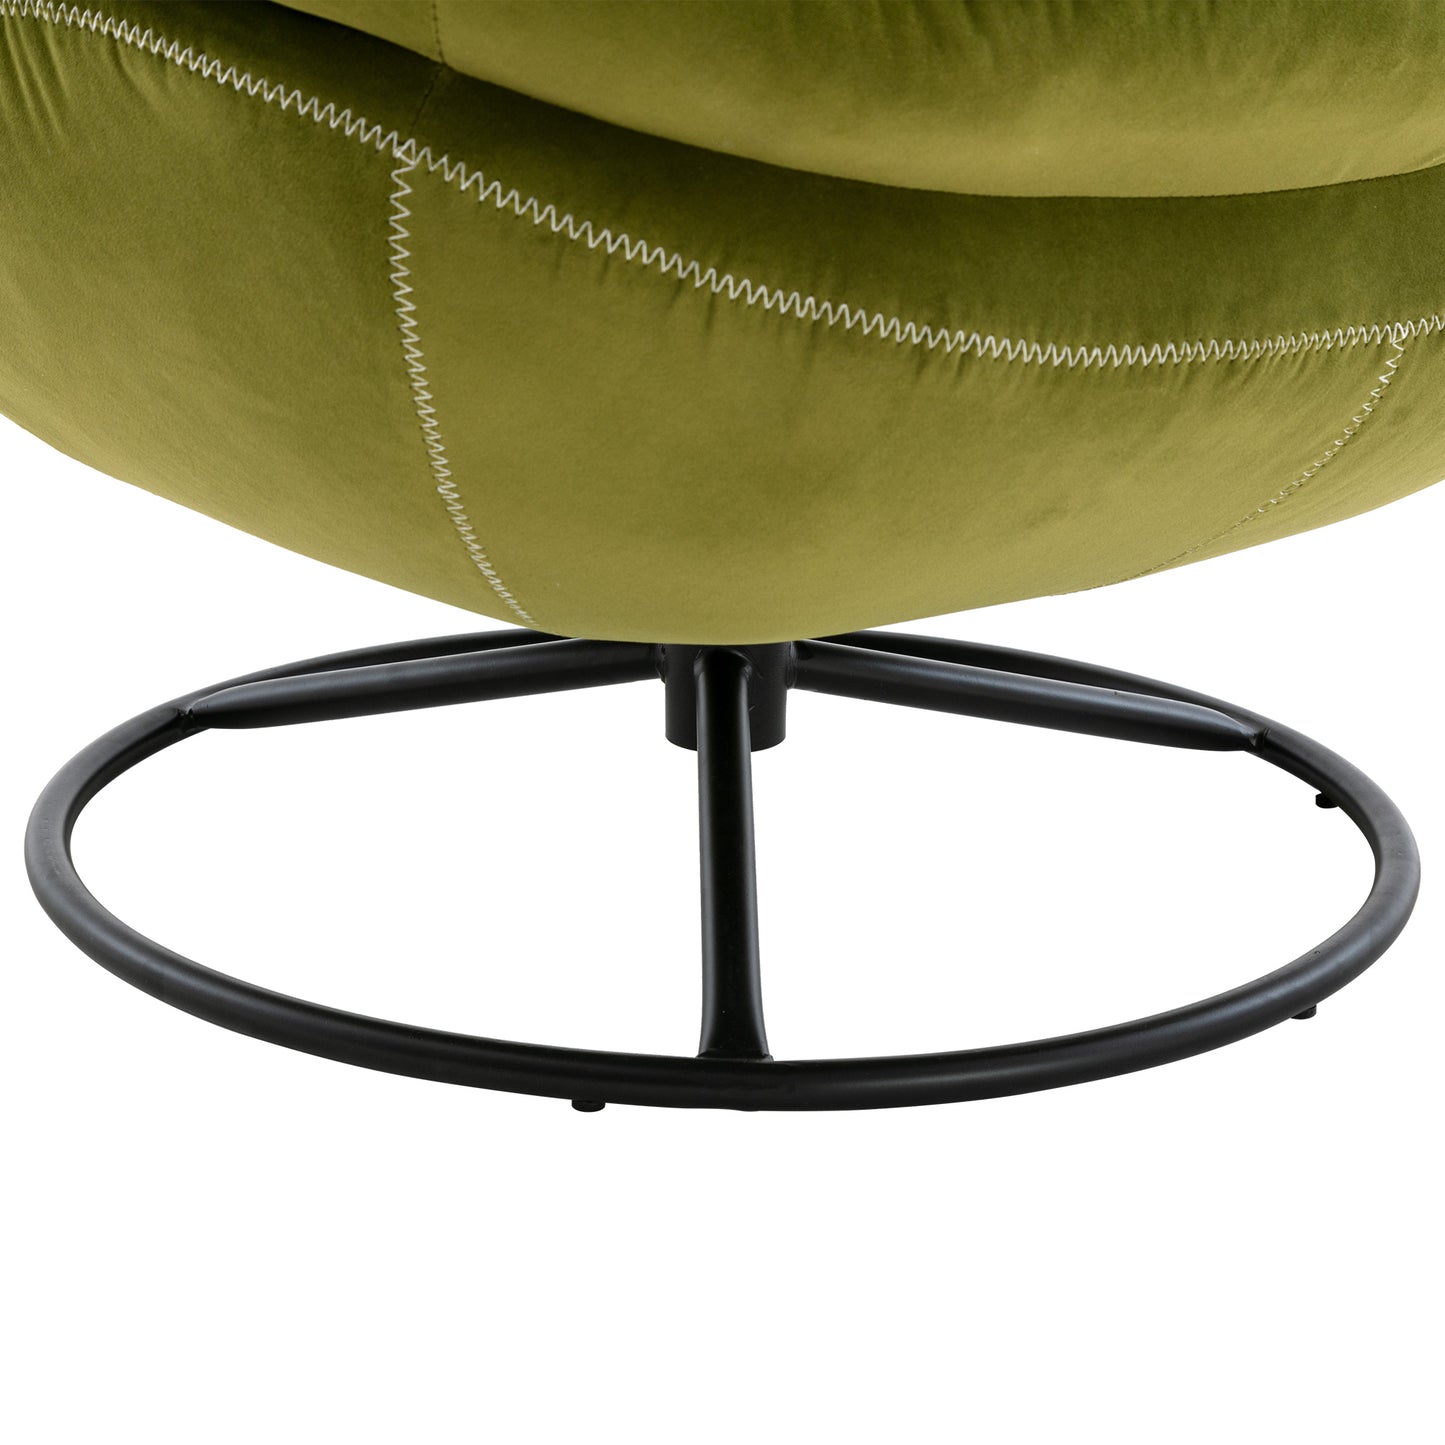 Accent chair Living room Chair, Ottoman-FRUIT GREEN